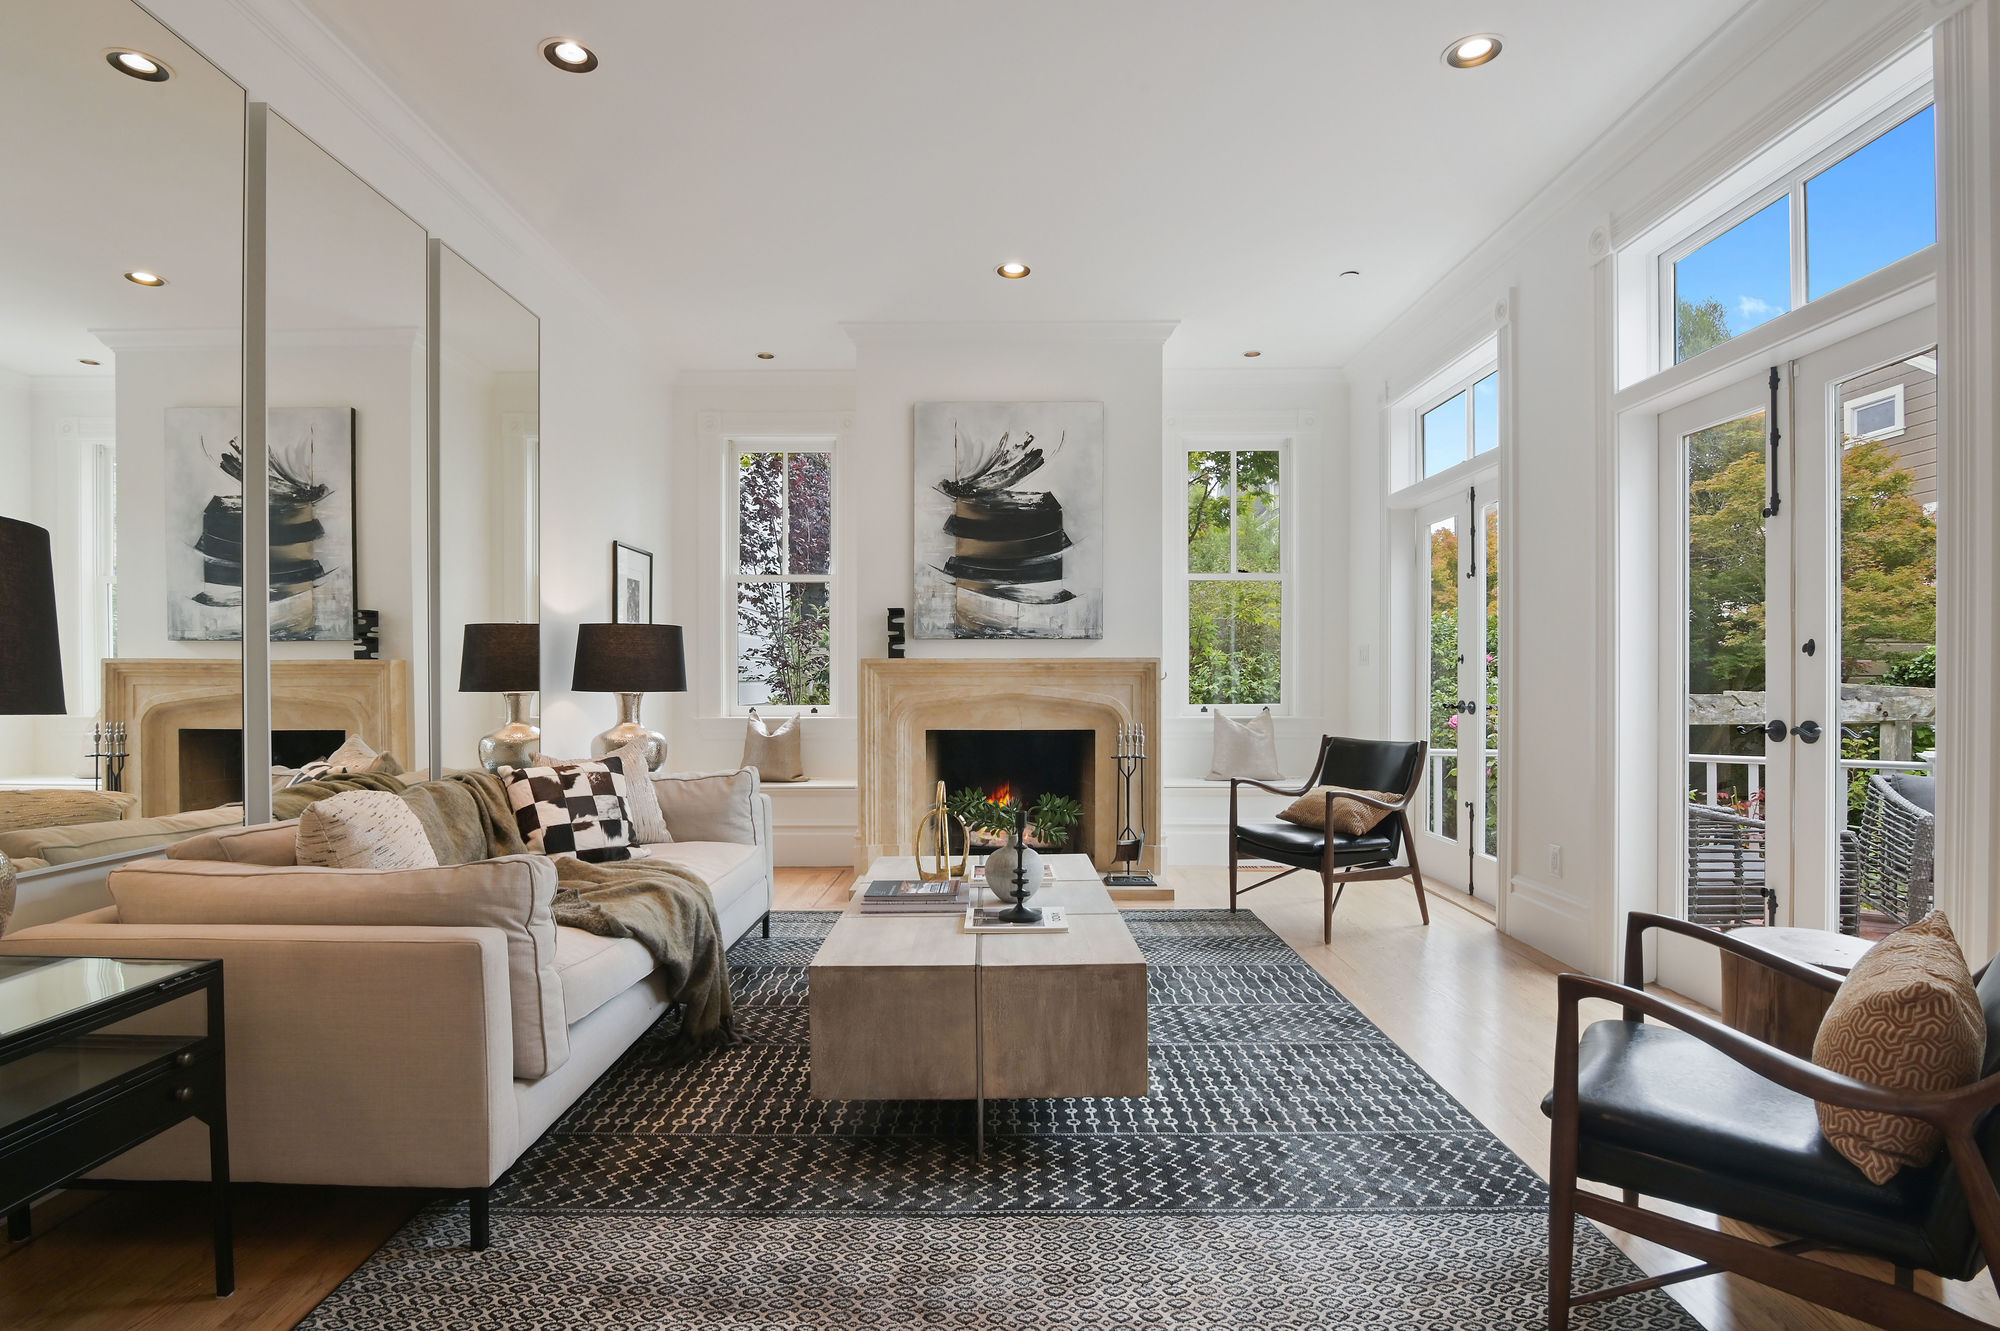 Property Photo: Living room with wood floors and double french doors